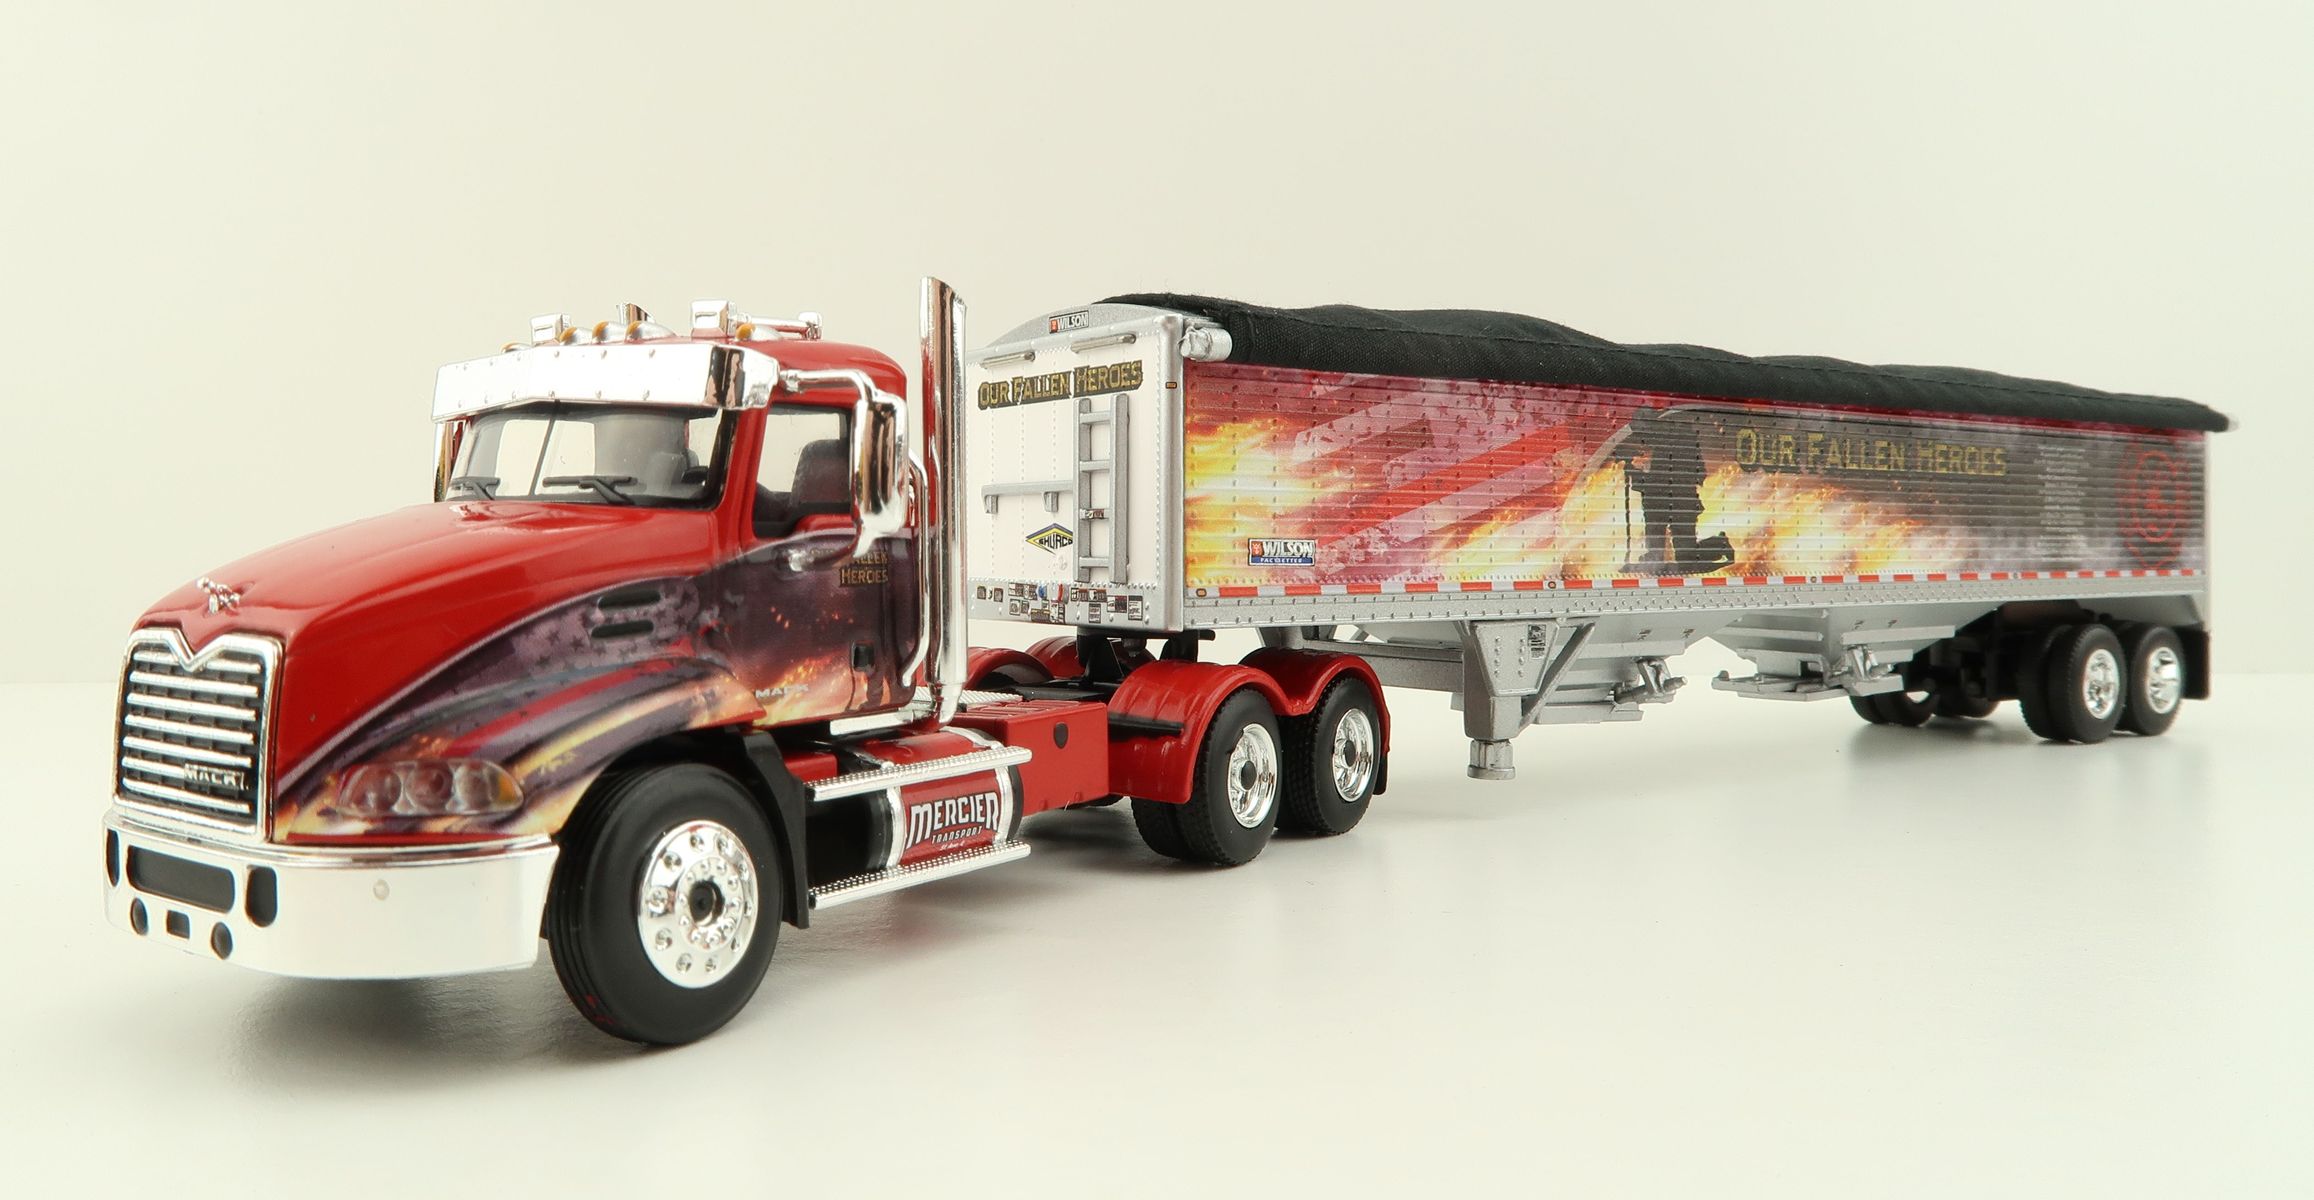 Product Image - First Gear 60-1114 Mack Pinnacle 6x4 Truck with Wilson Grain Trailer Mercier Transport - Our Fallen Heroes - Scale 1:64